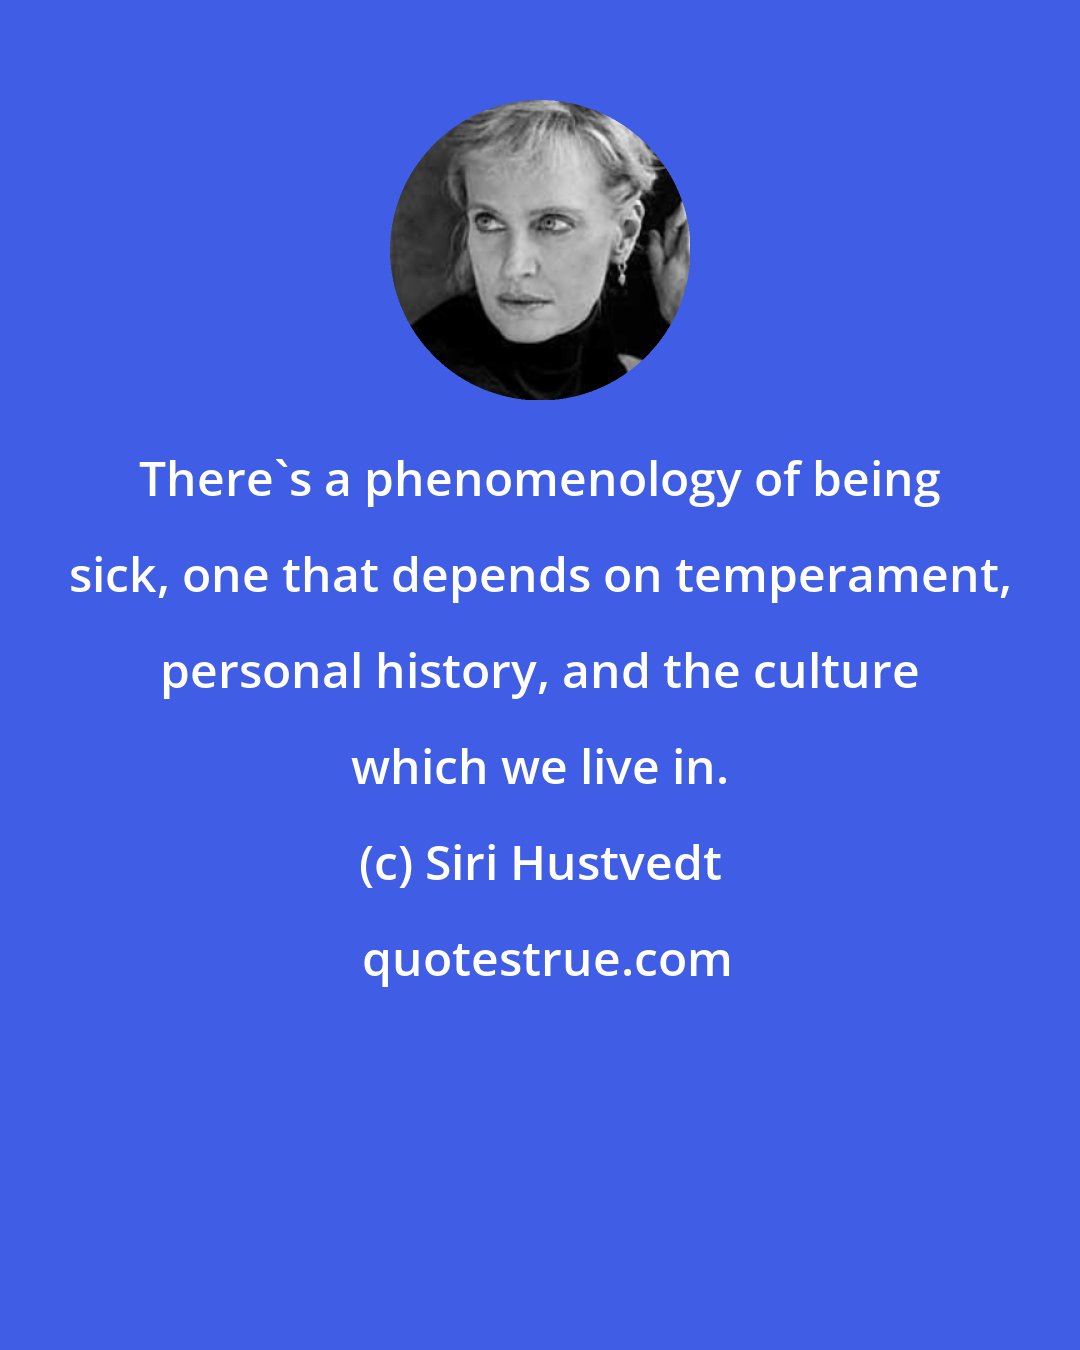 Siri Hustvedt: There's a phenomenology of being sick, one that depends on temperament, personal history, and the culture which we live in.